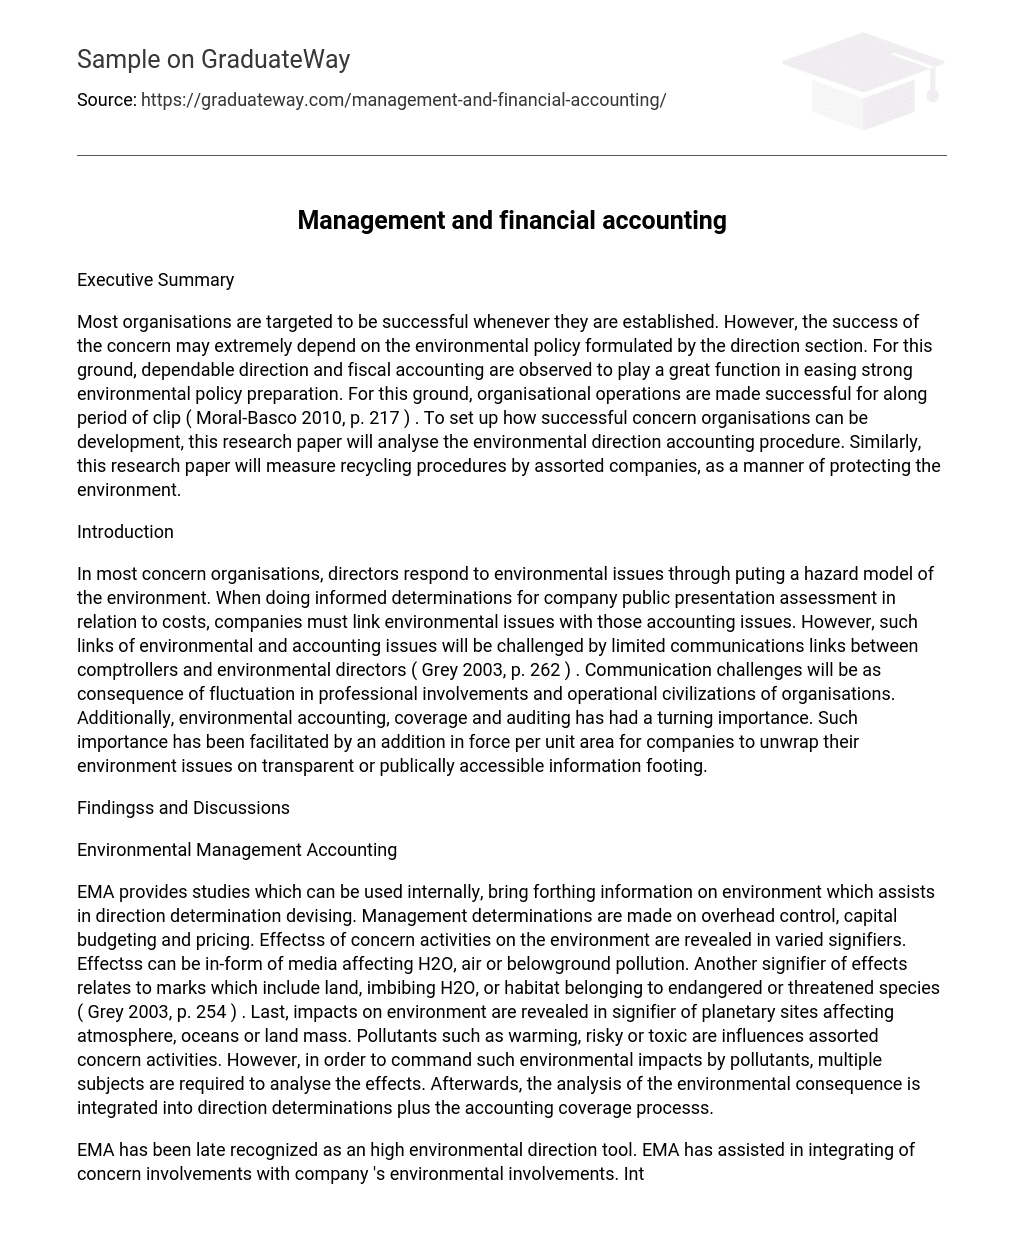 Management and financial accounting